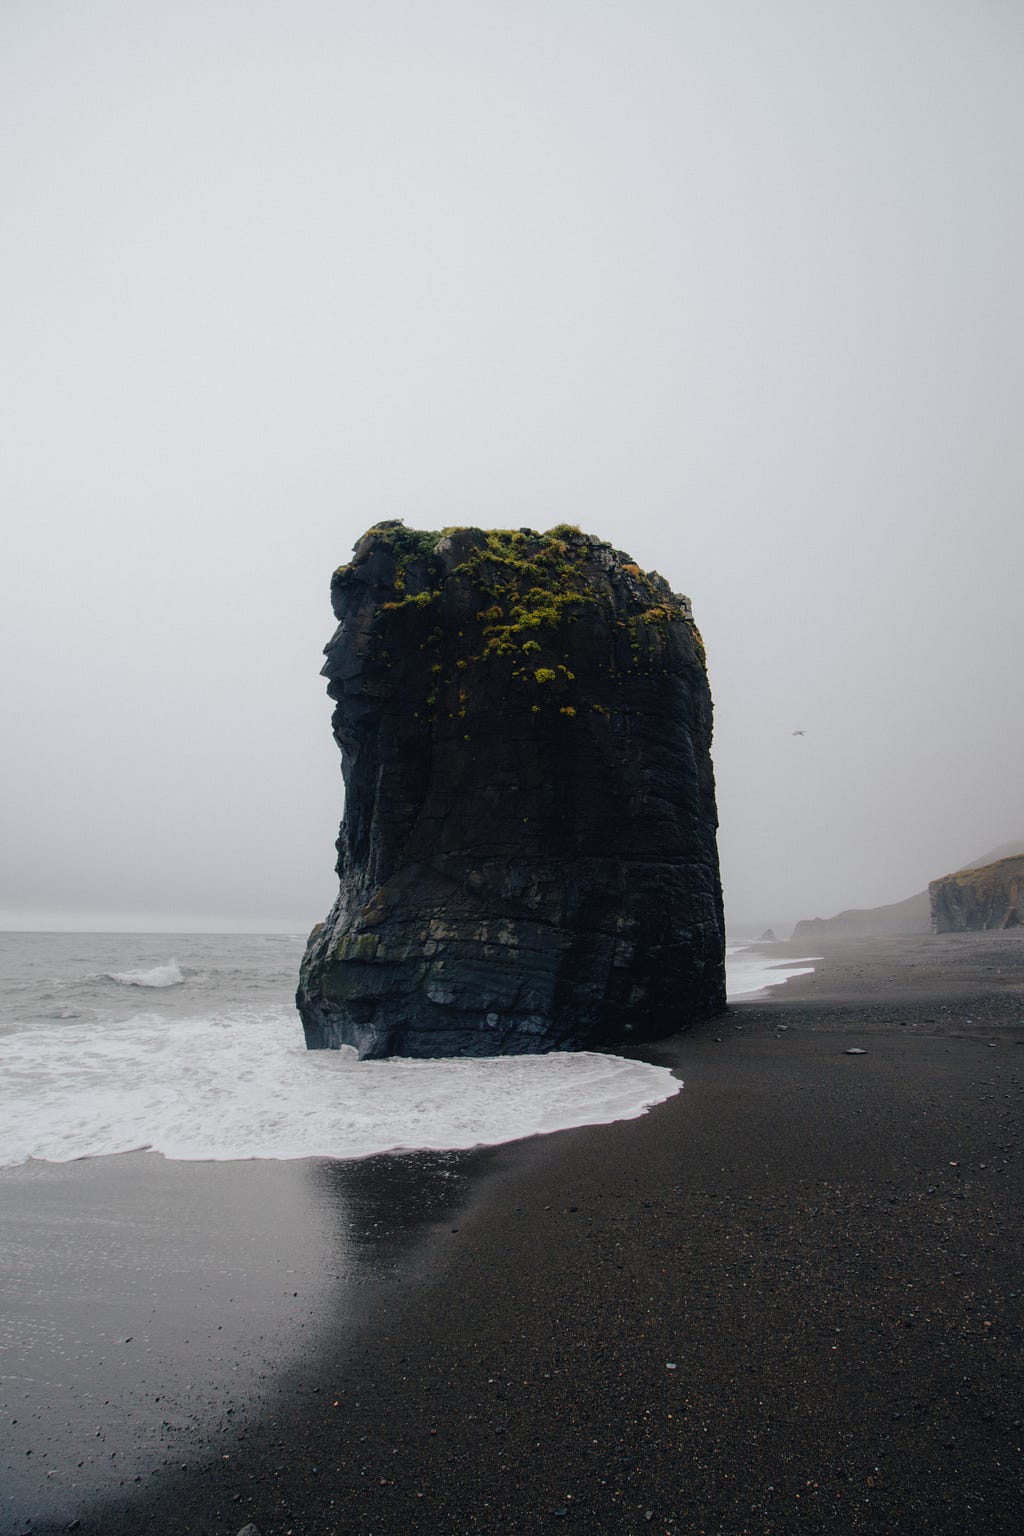 A rock monolith surrounded by the sea.